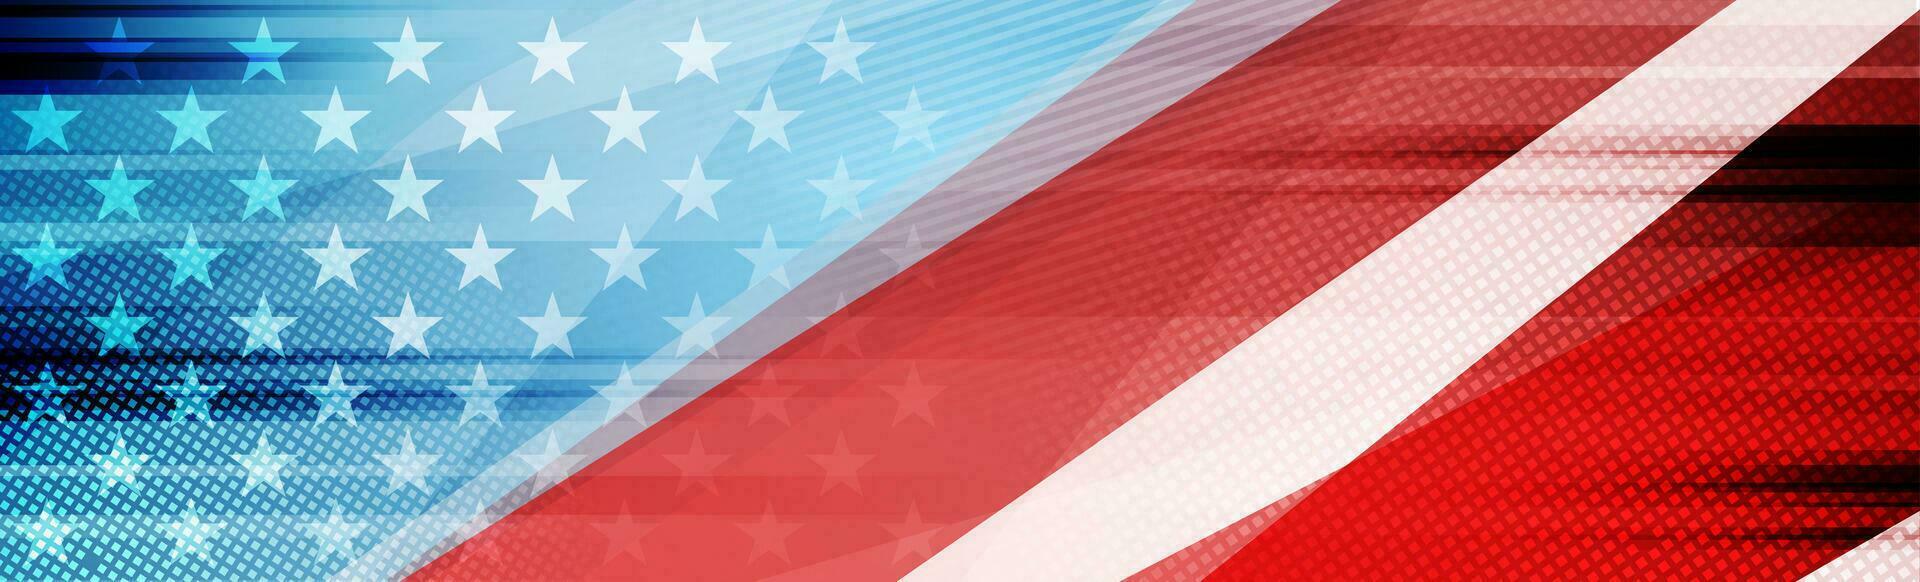 Grunge concept USA flag abstract background vector